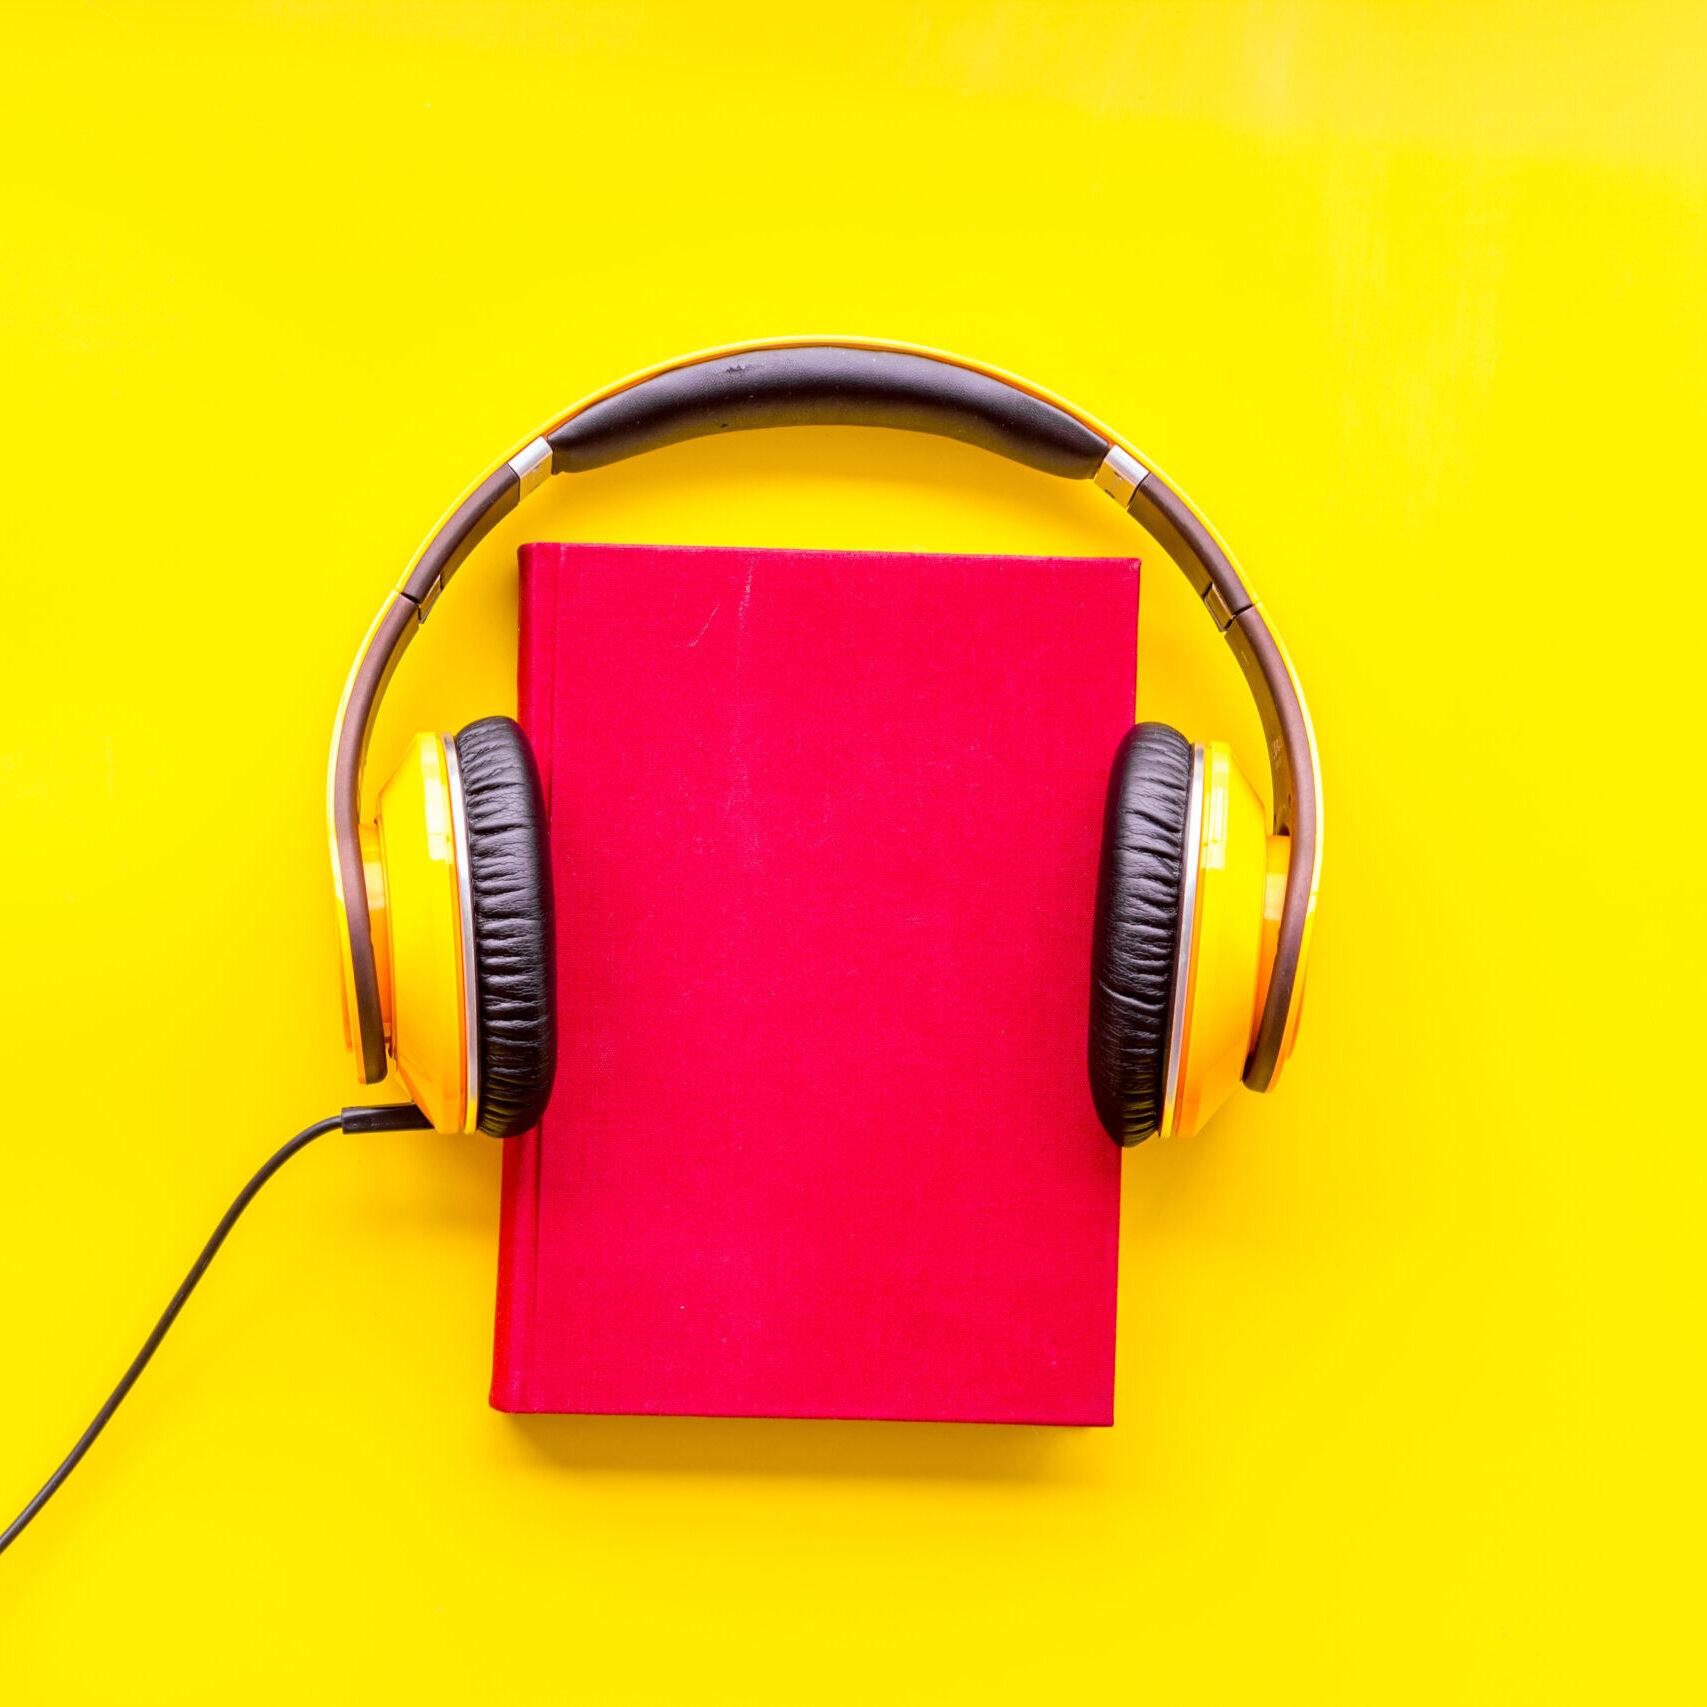 listen to audio books with headphone on yellow library desk background flatlay